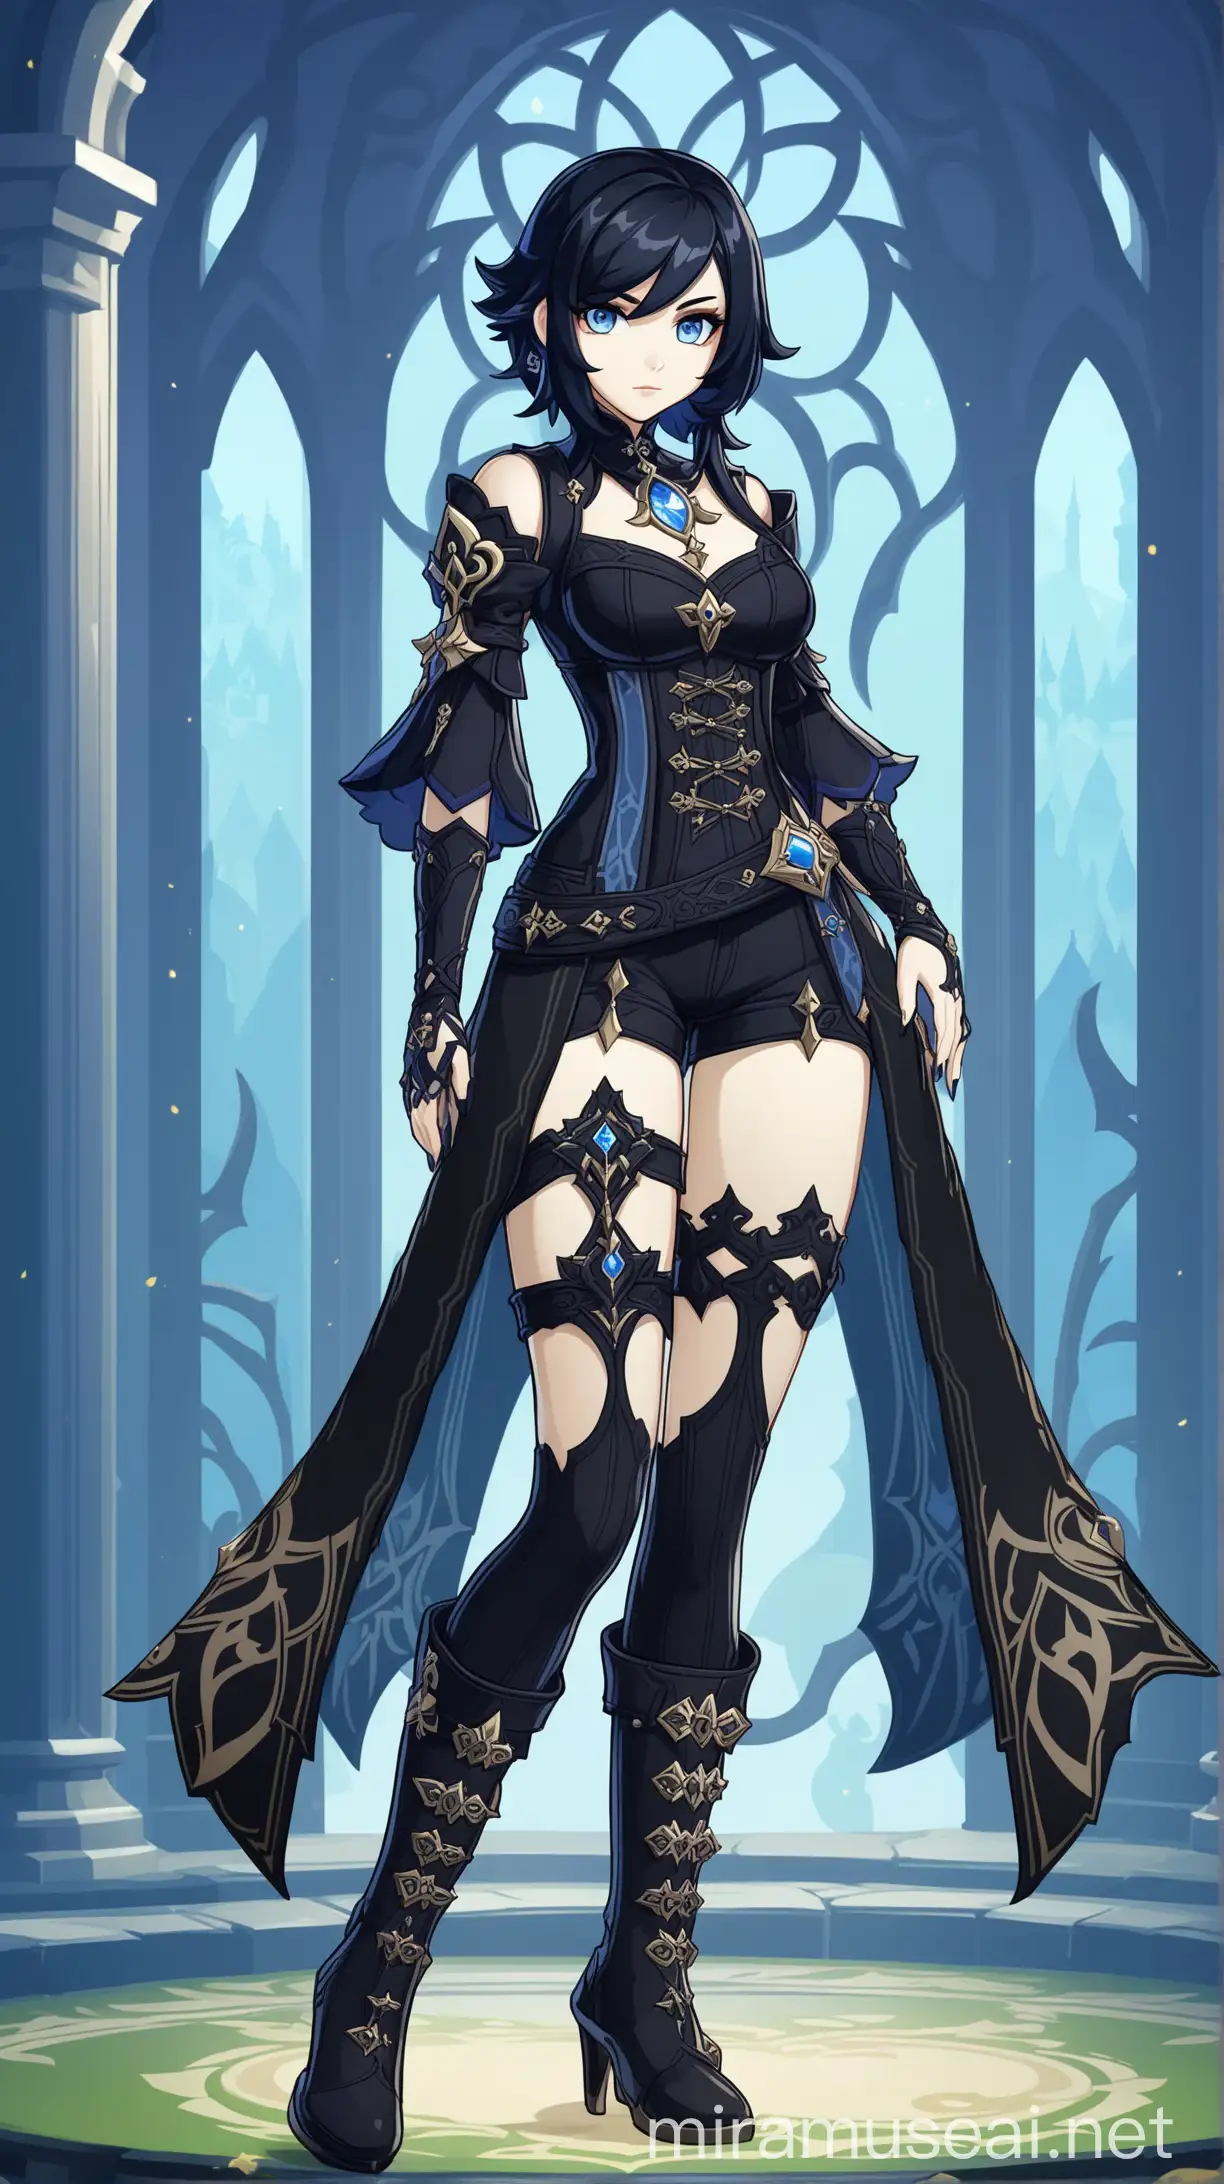 Gothic Style Female Original Character with Black Hair and Blue Eyes in Genshin Impact Art Style